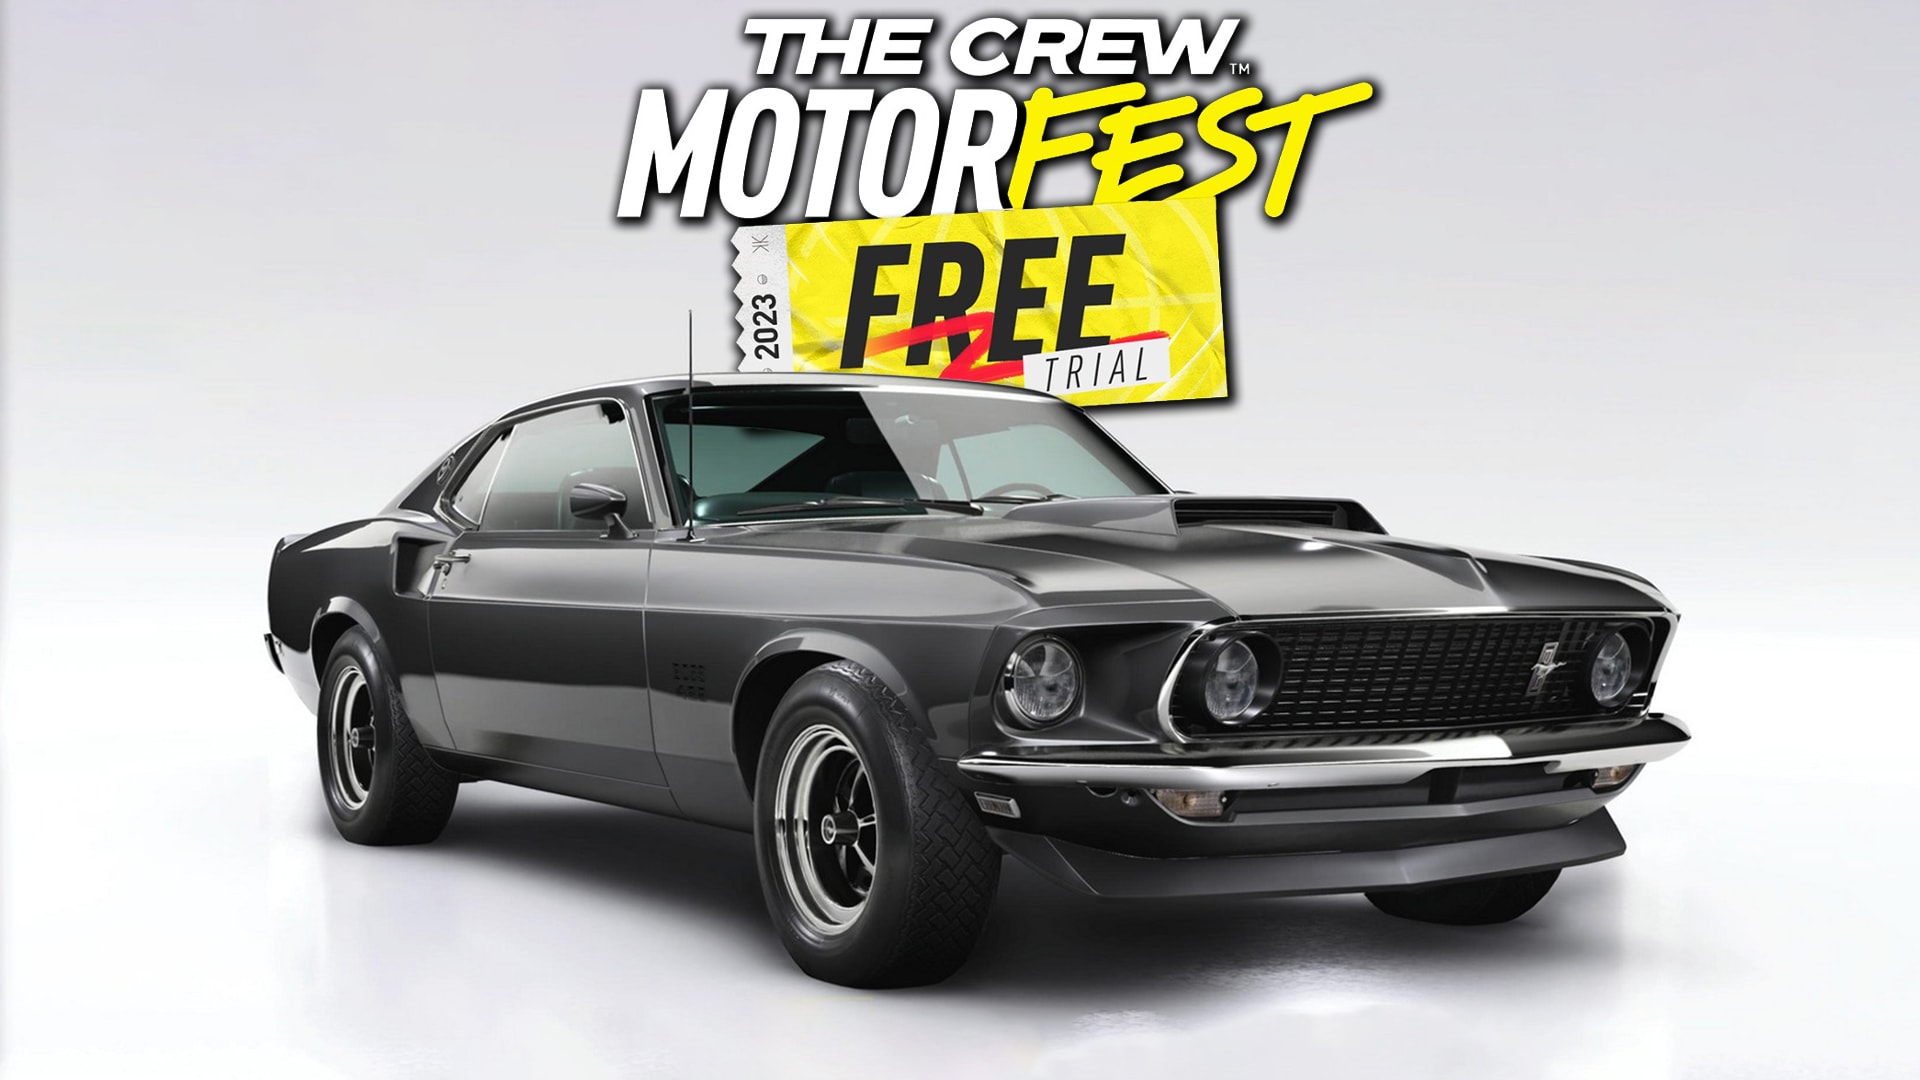 The Crew Motorfest (PS5), PlayStation 5 Game, Free shipping over £20